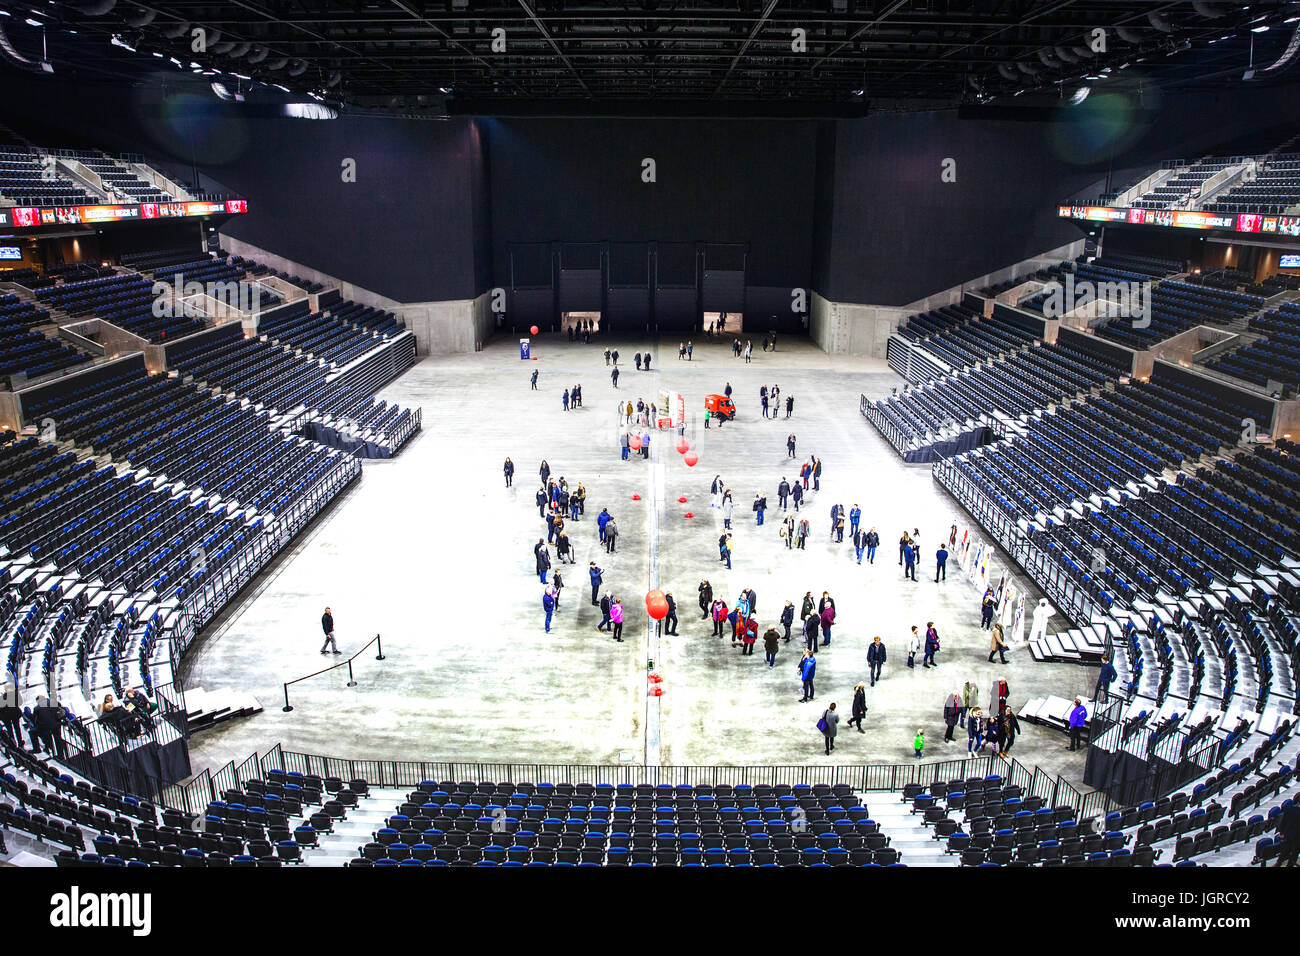 brændt silhuet Papua Ny Guinea Inside the Royal Arena, which is an indoor cultural meeting place in  Copenhagen, Denmark. The Arena is known for its Nordic design and was  hosting events such as the Eurovision Song Contest